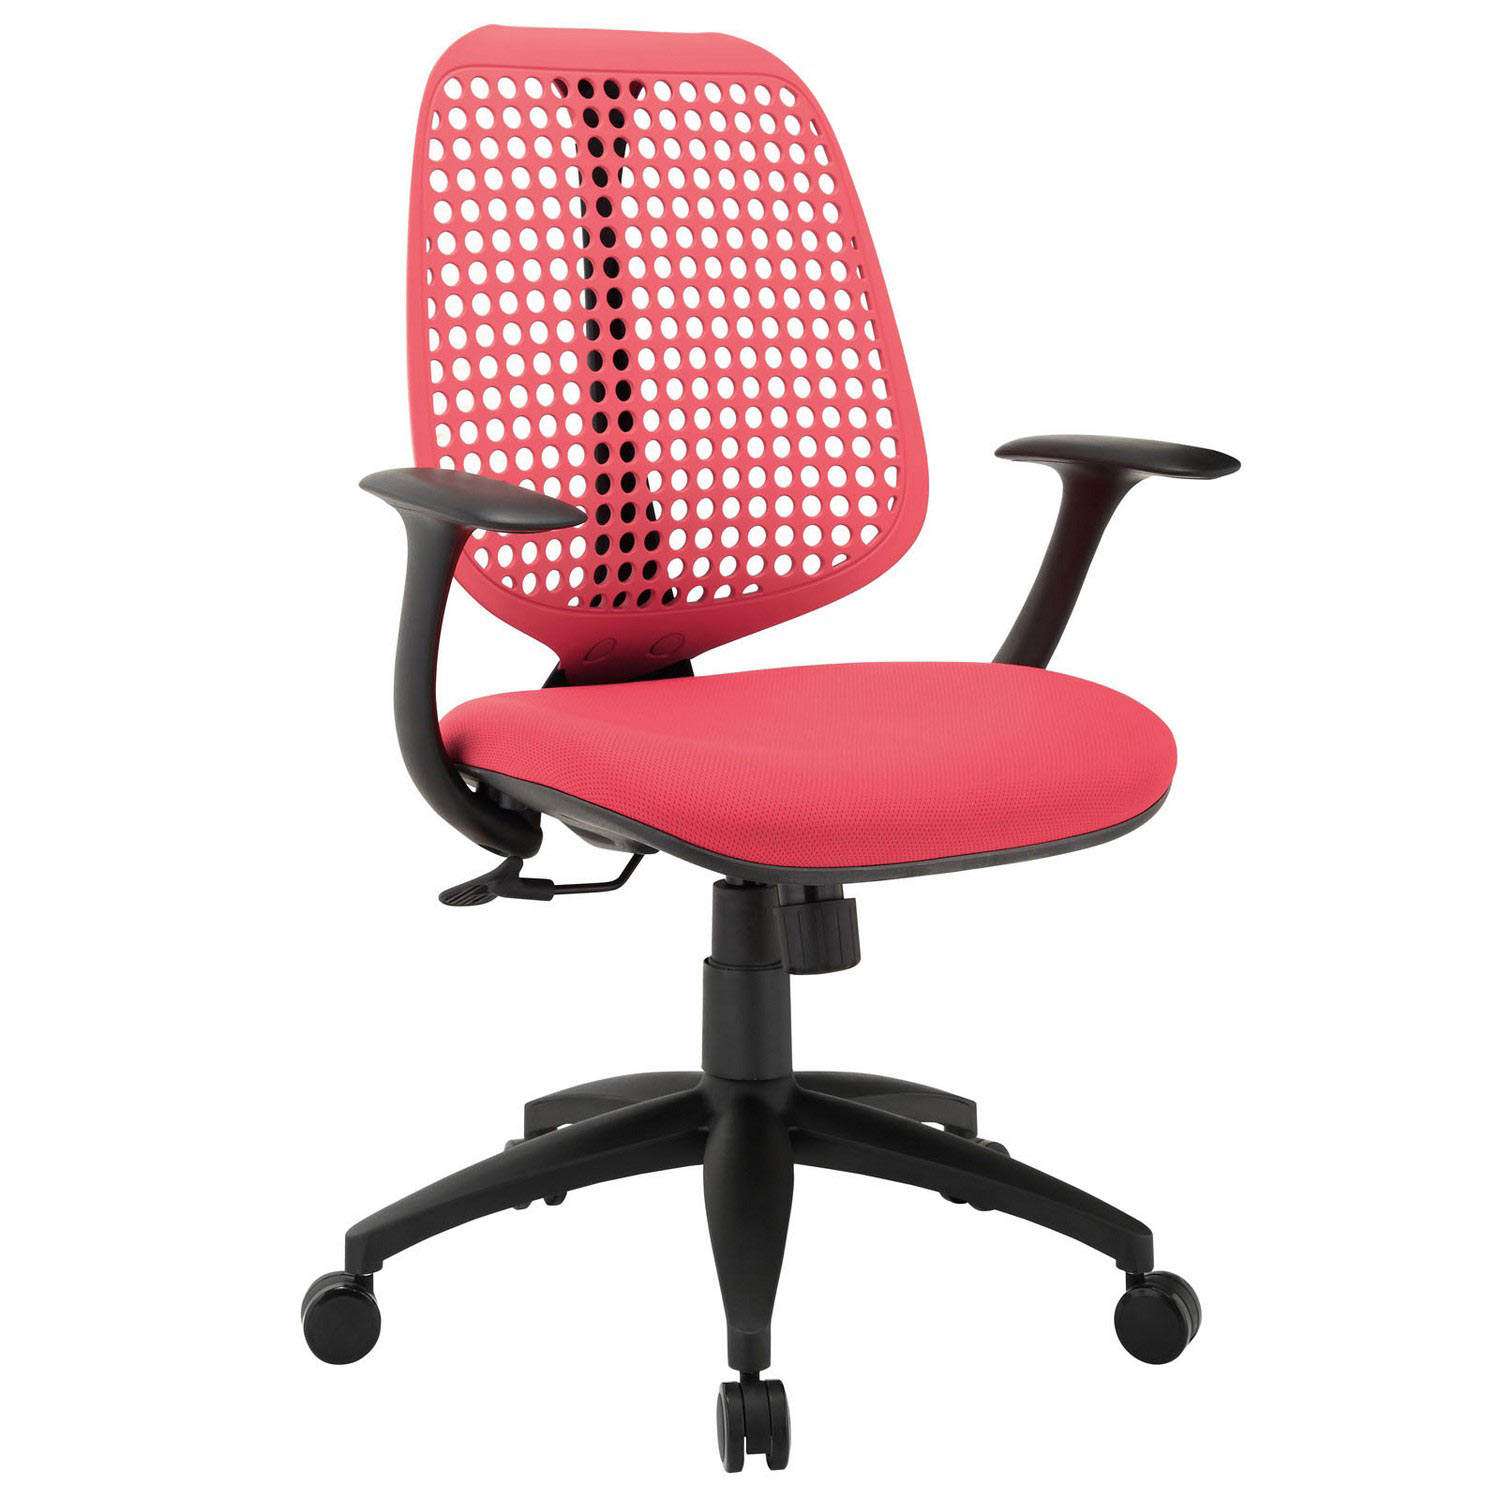 Modway Reverb Office Chair - Red